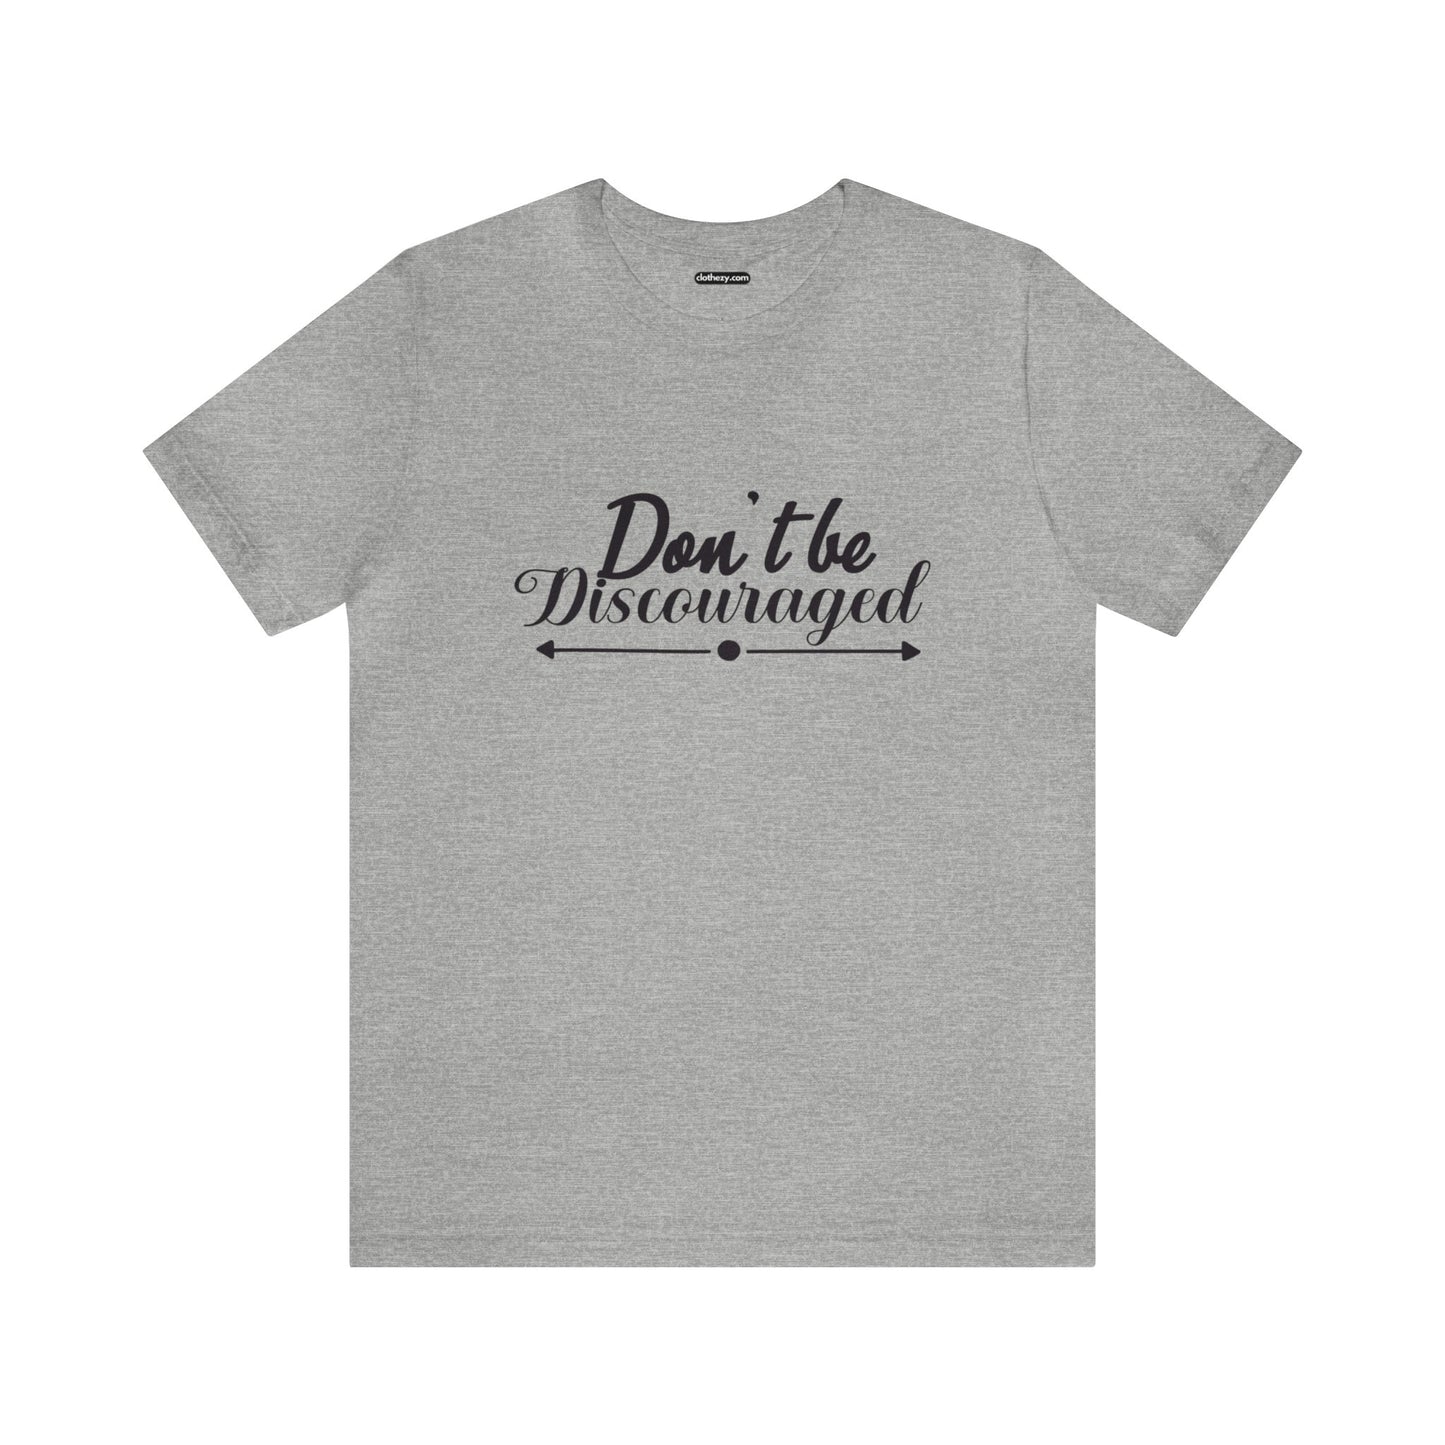 Don't Be Discouraged - Unisex Adult Tee by clothezy.com - Buy Now